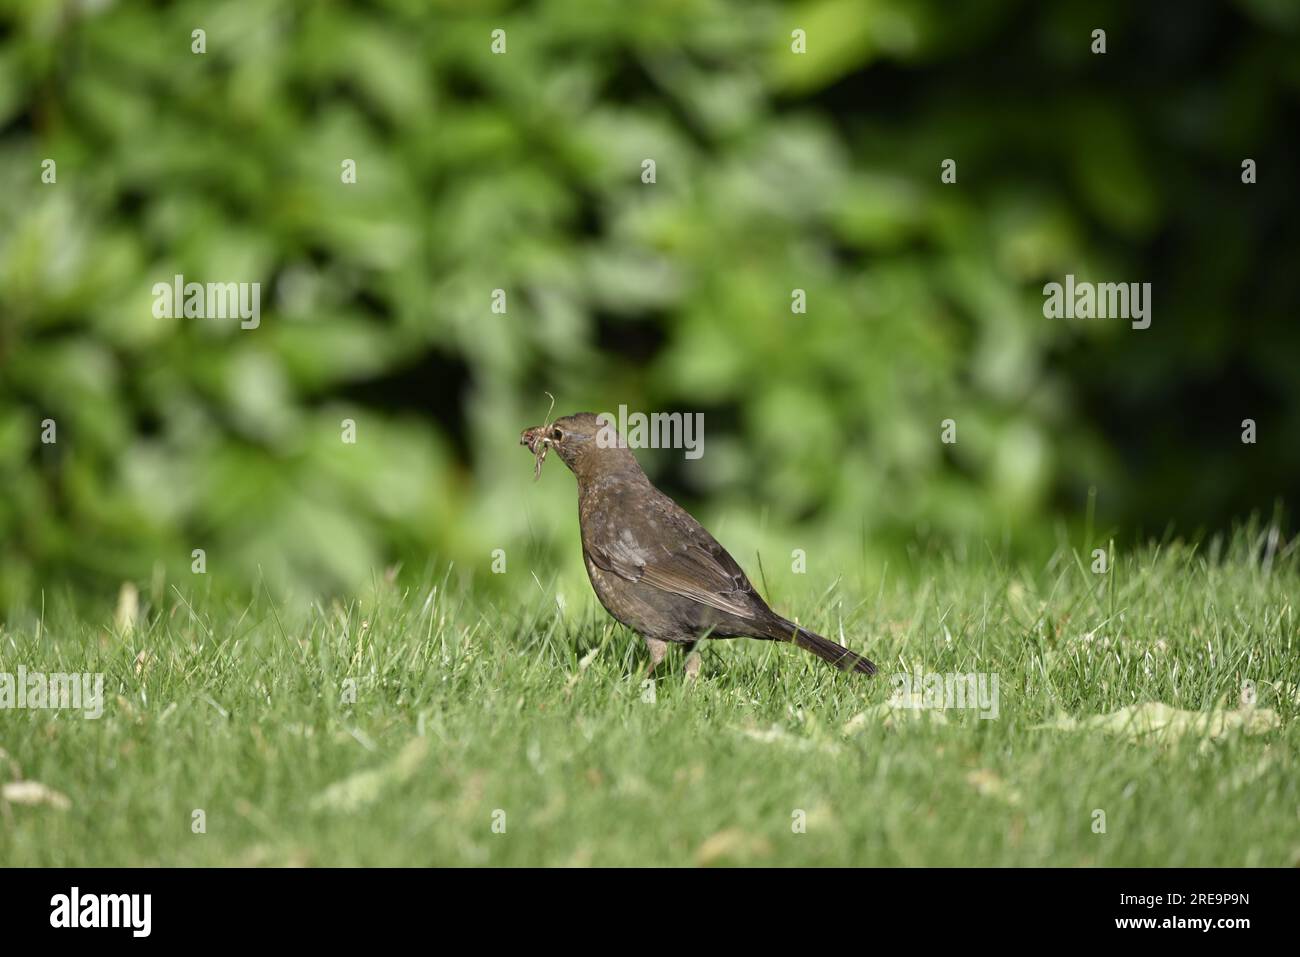 Middle Foreground Image of a Female Common Blackbird (Turdus merula) Standing on Grass in Left-Profile, with Worms in Beak, taken in mid-Wales, UK Stock Photo